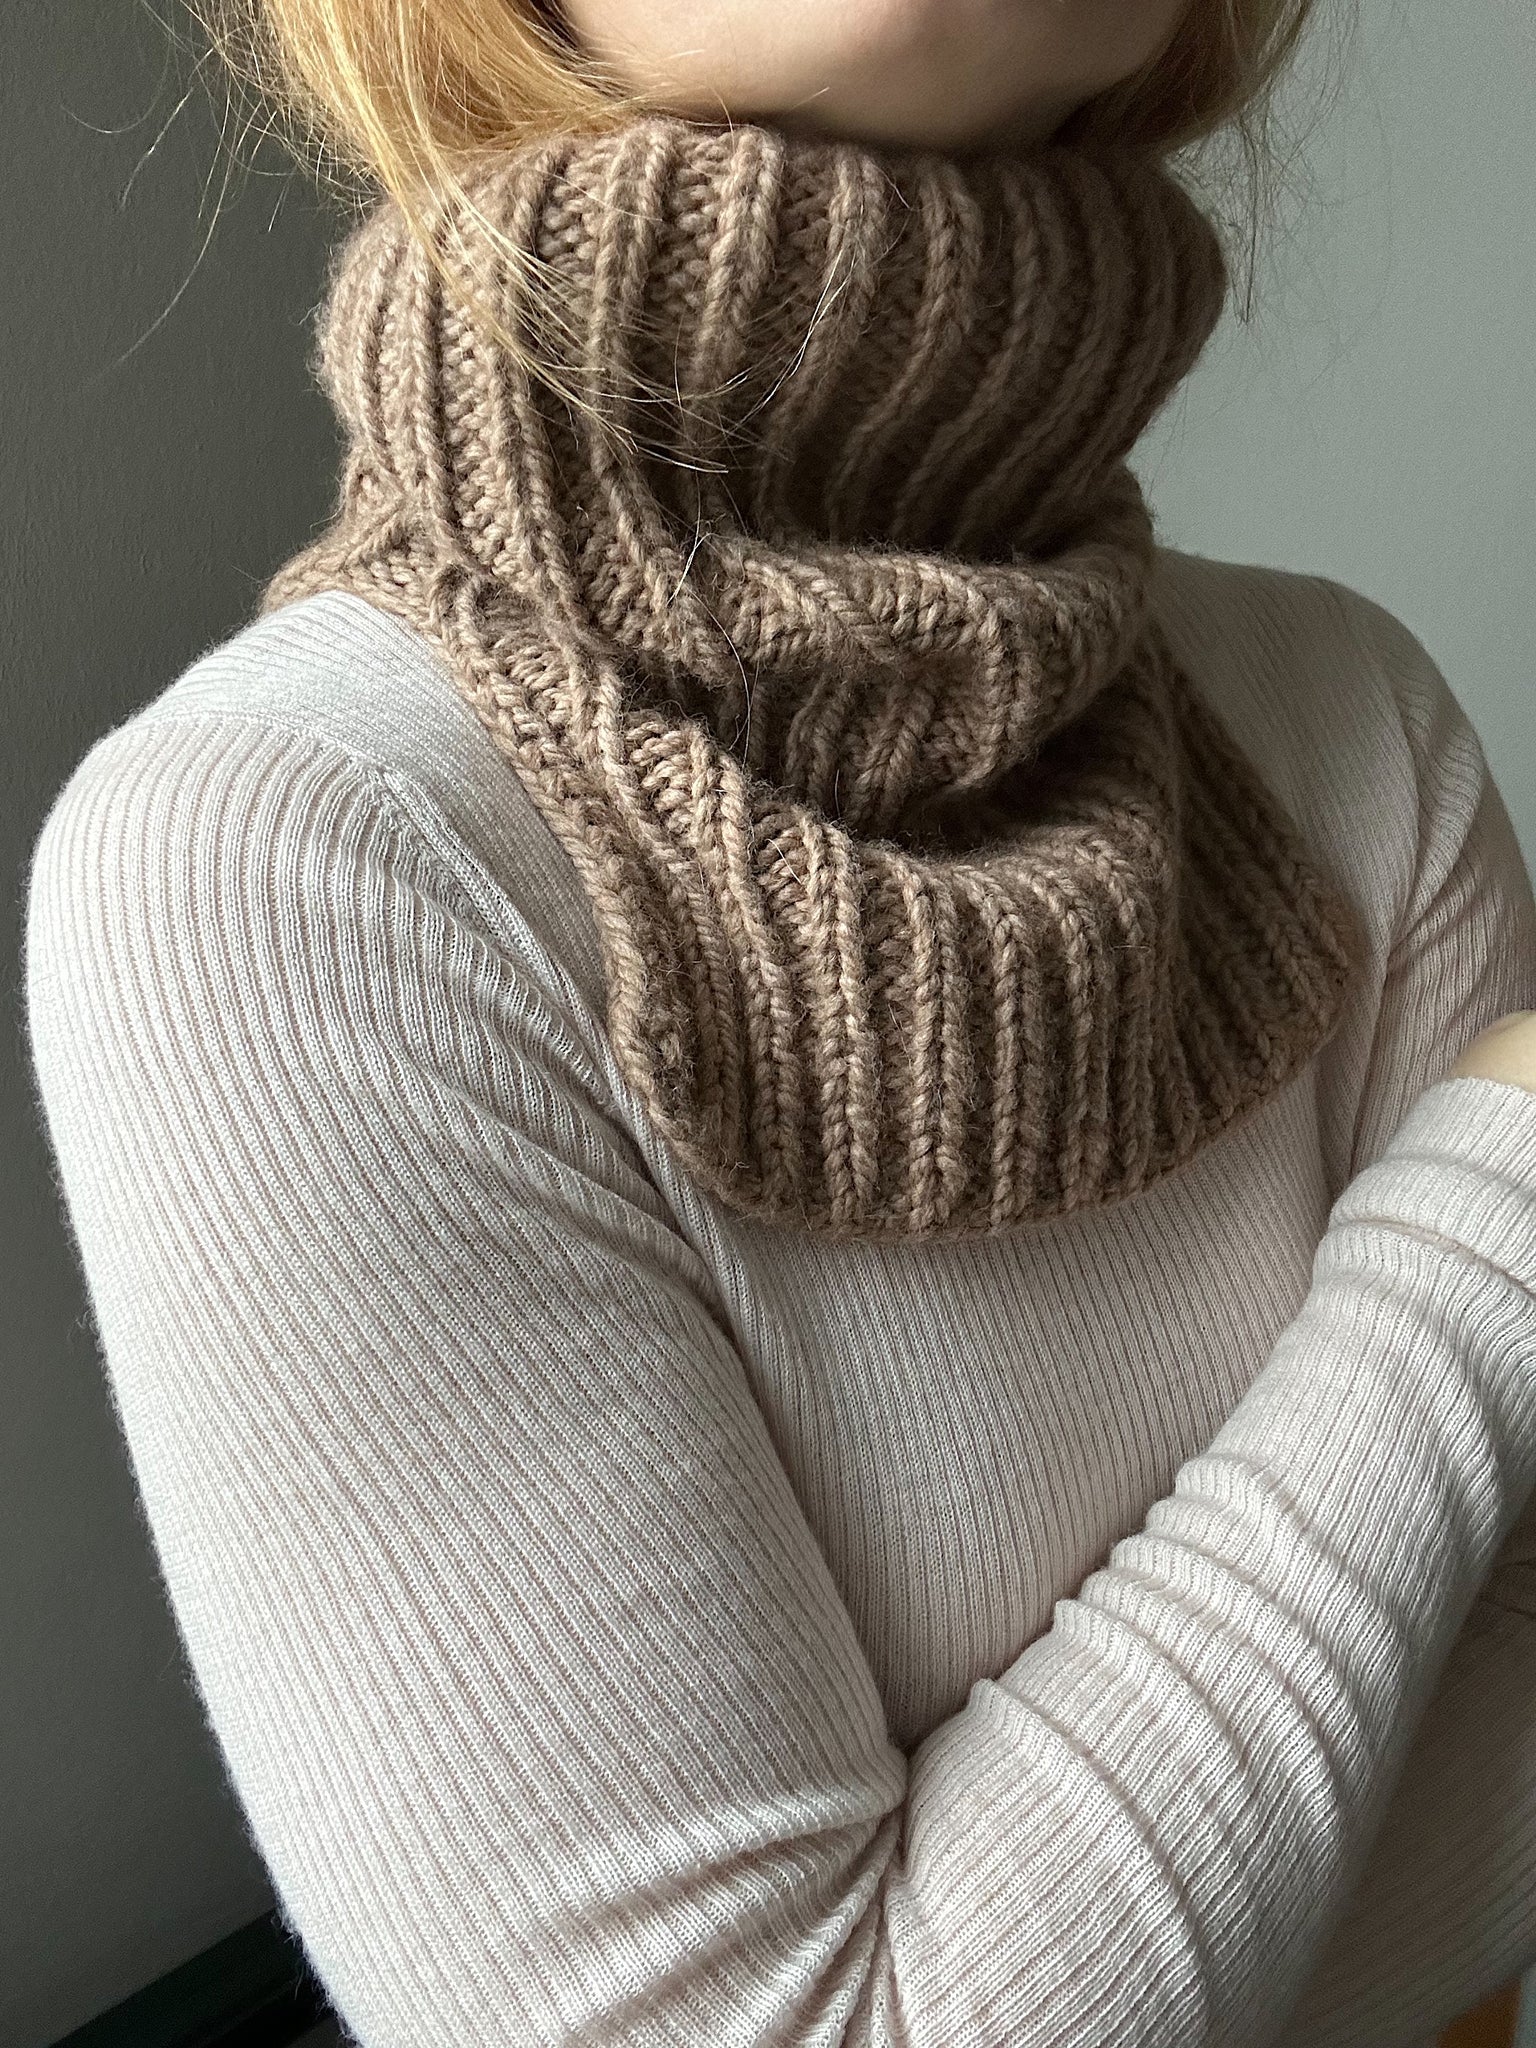 Nellie Neck Warmer - Knitting Pattern in English – • MY FAVOURITE THINGS •  KNITWEAR